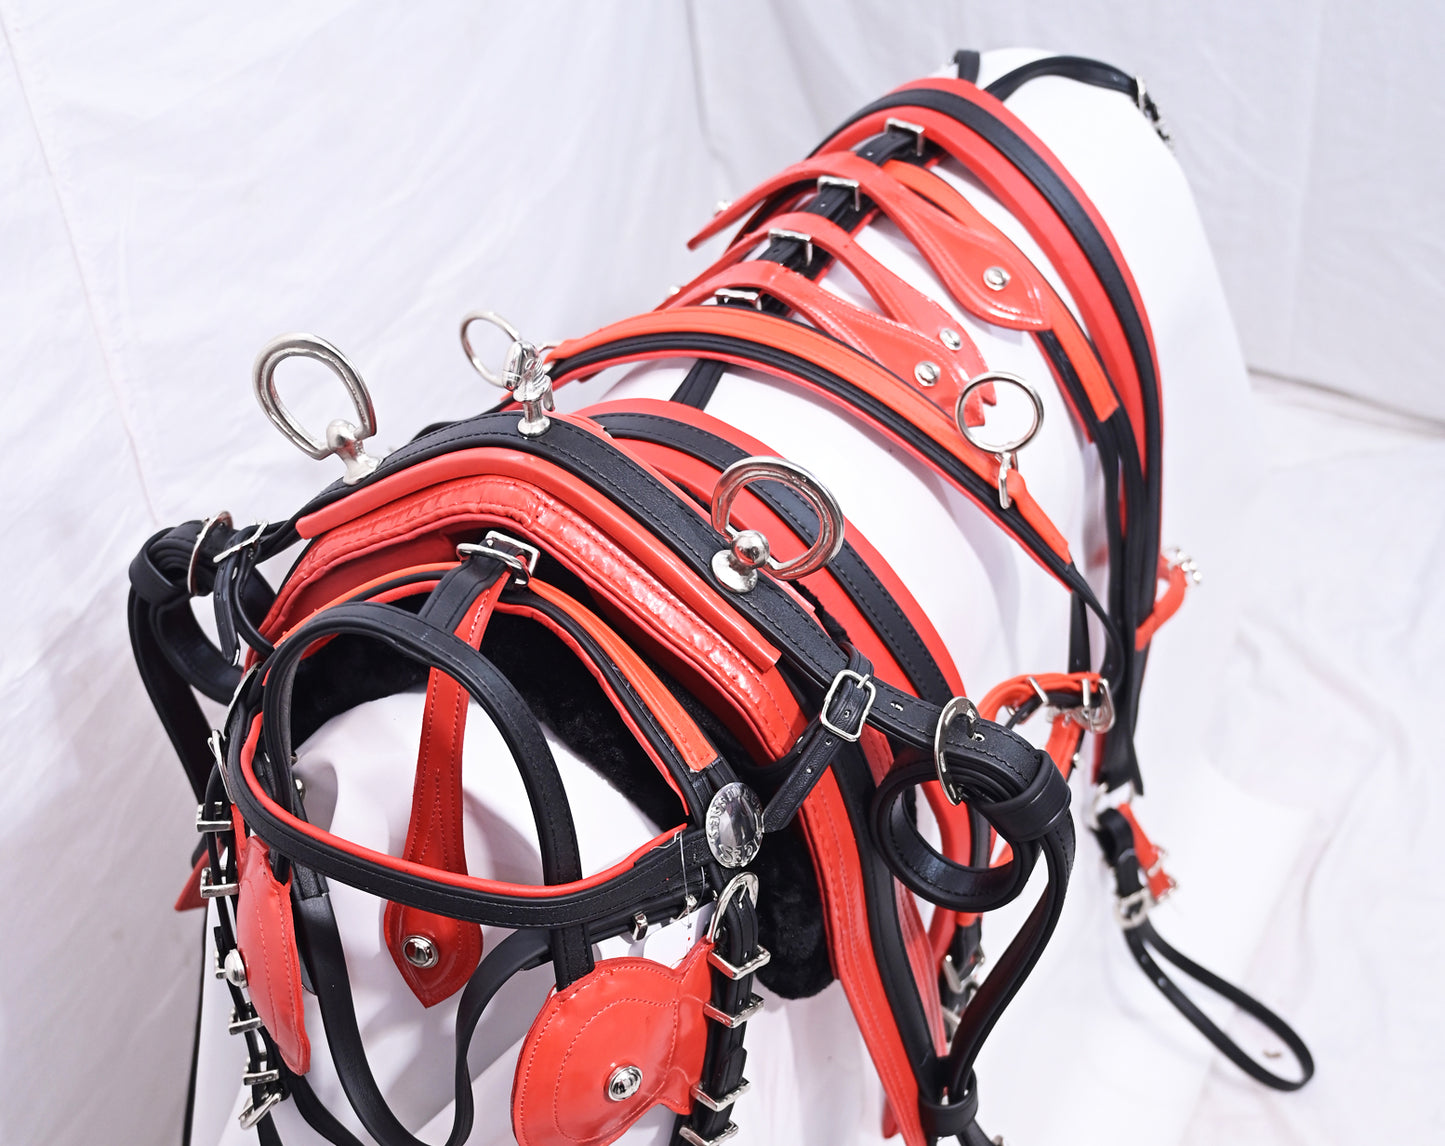 Breaching Tiedown Driving Harness Black and Red